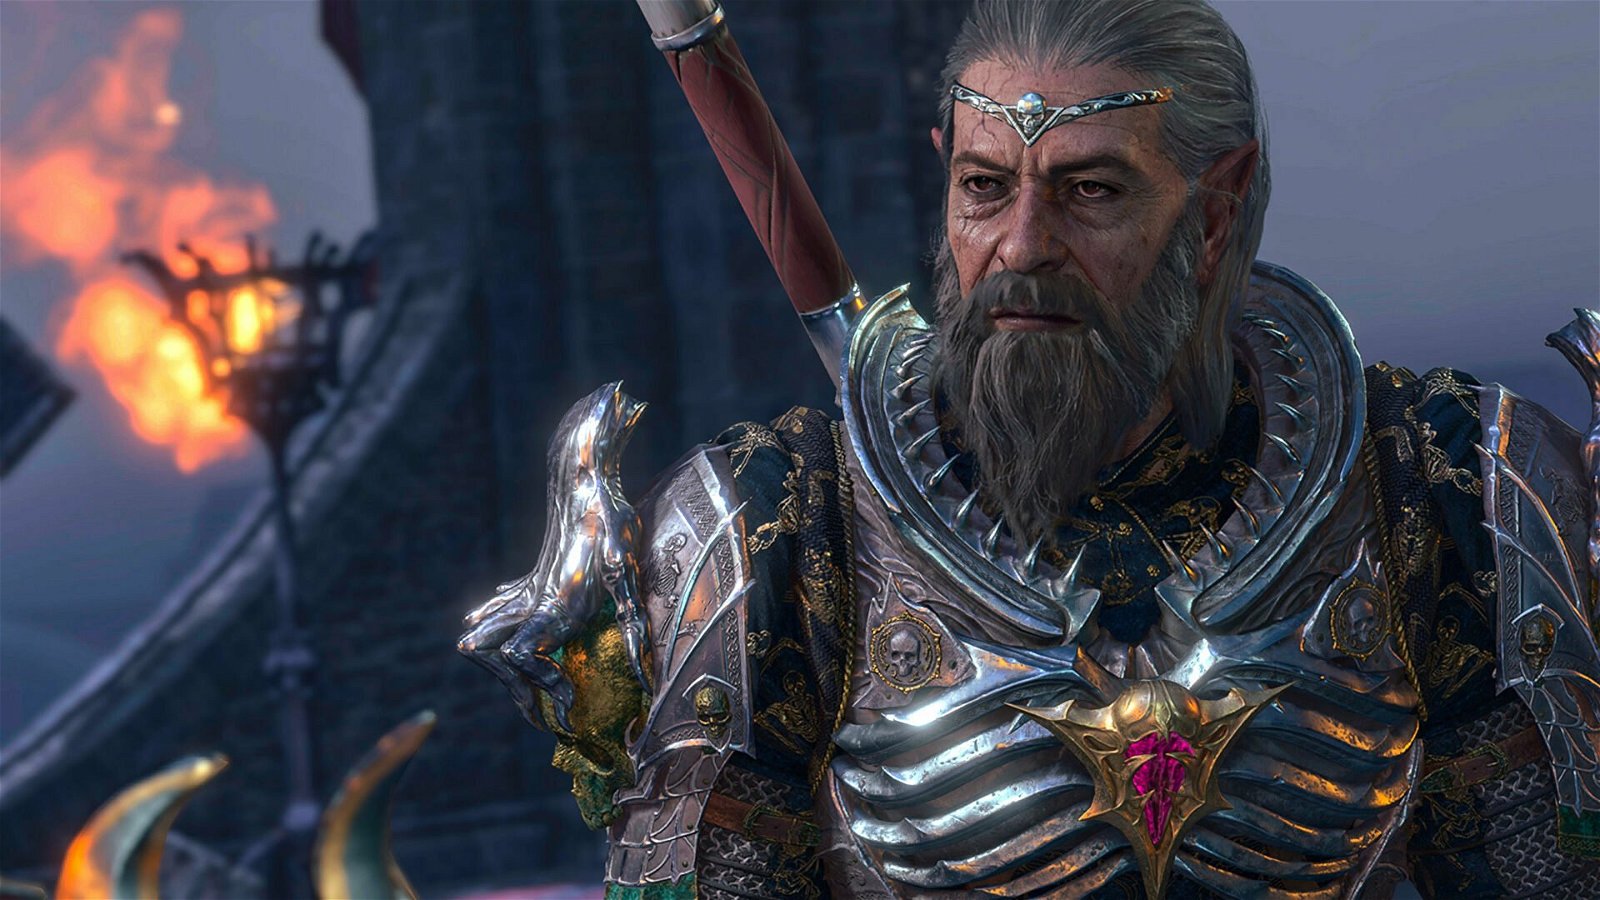 baldurs gate 3 announced for ps5 amp features j k simmons as the big bad in new trailer 23022402